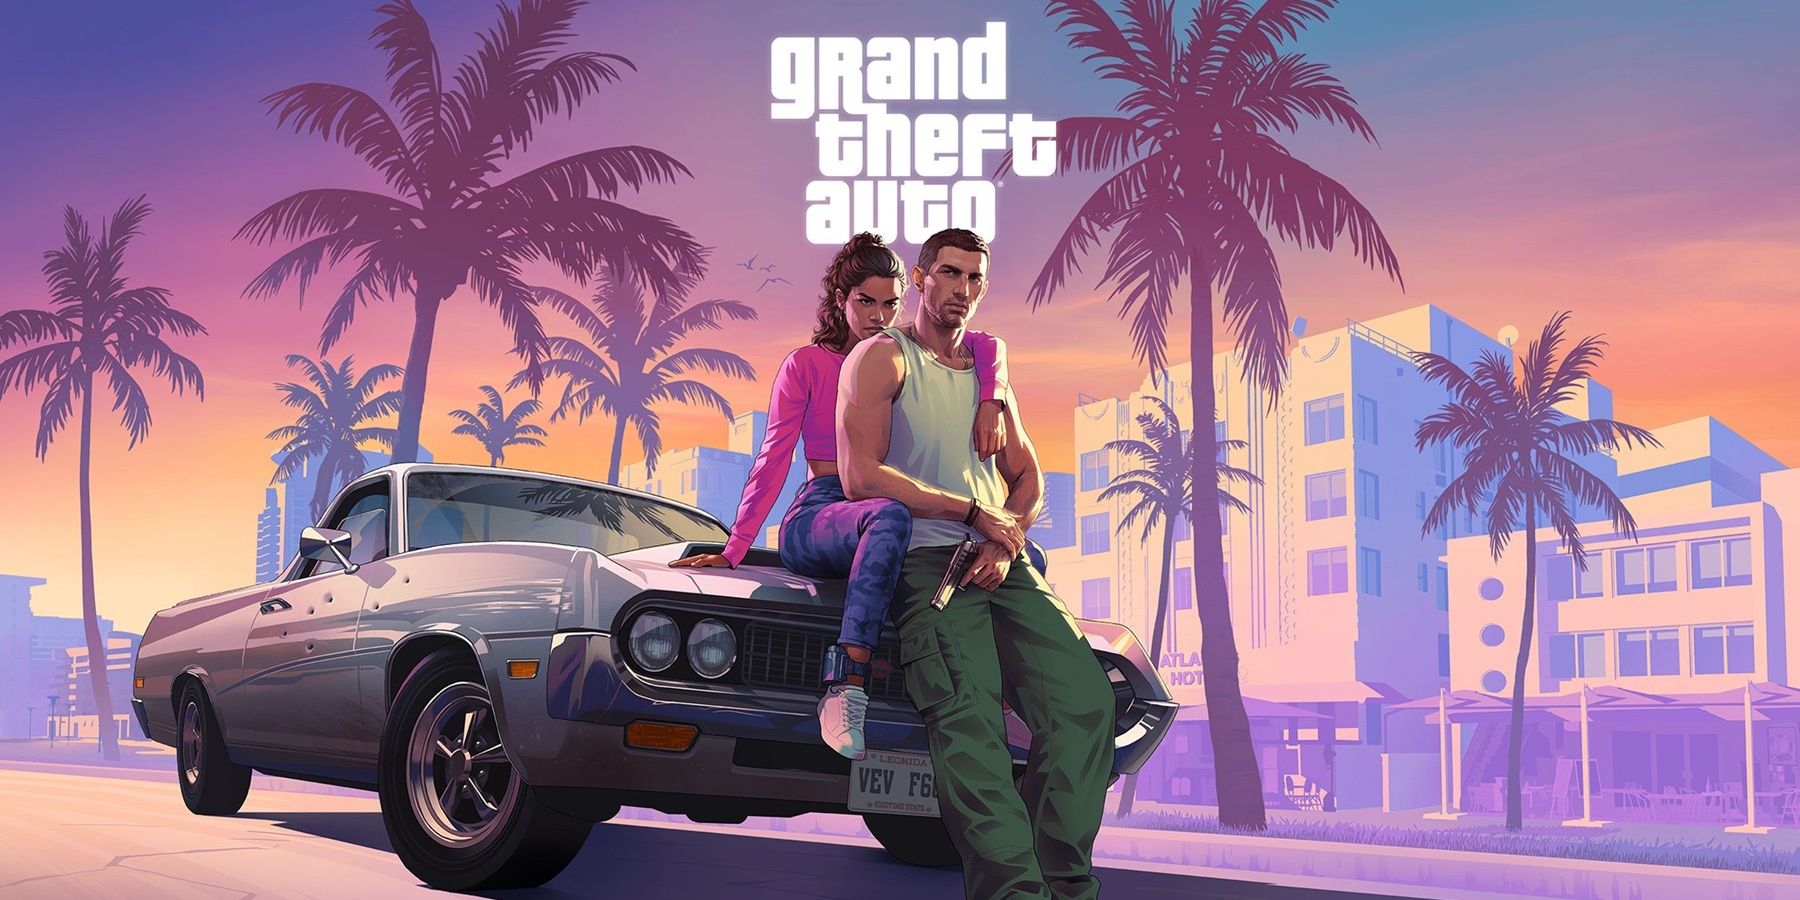 take-two-ceo-comments-on-impact-of-grand-theft-auto-6-trailer-leak